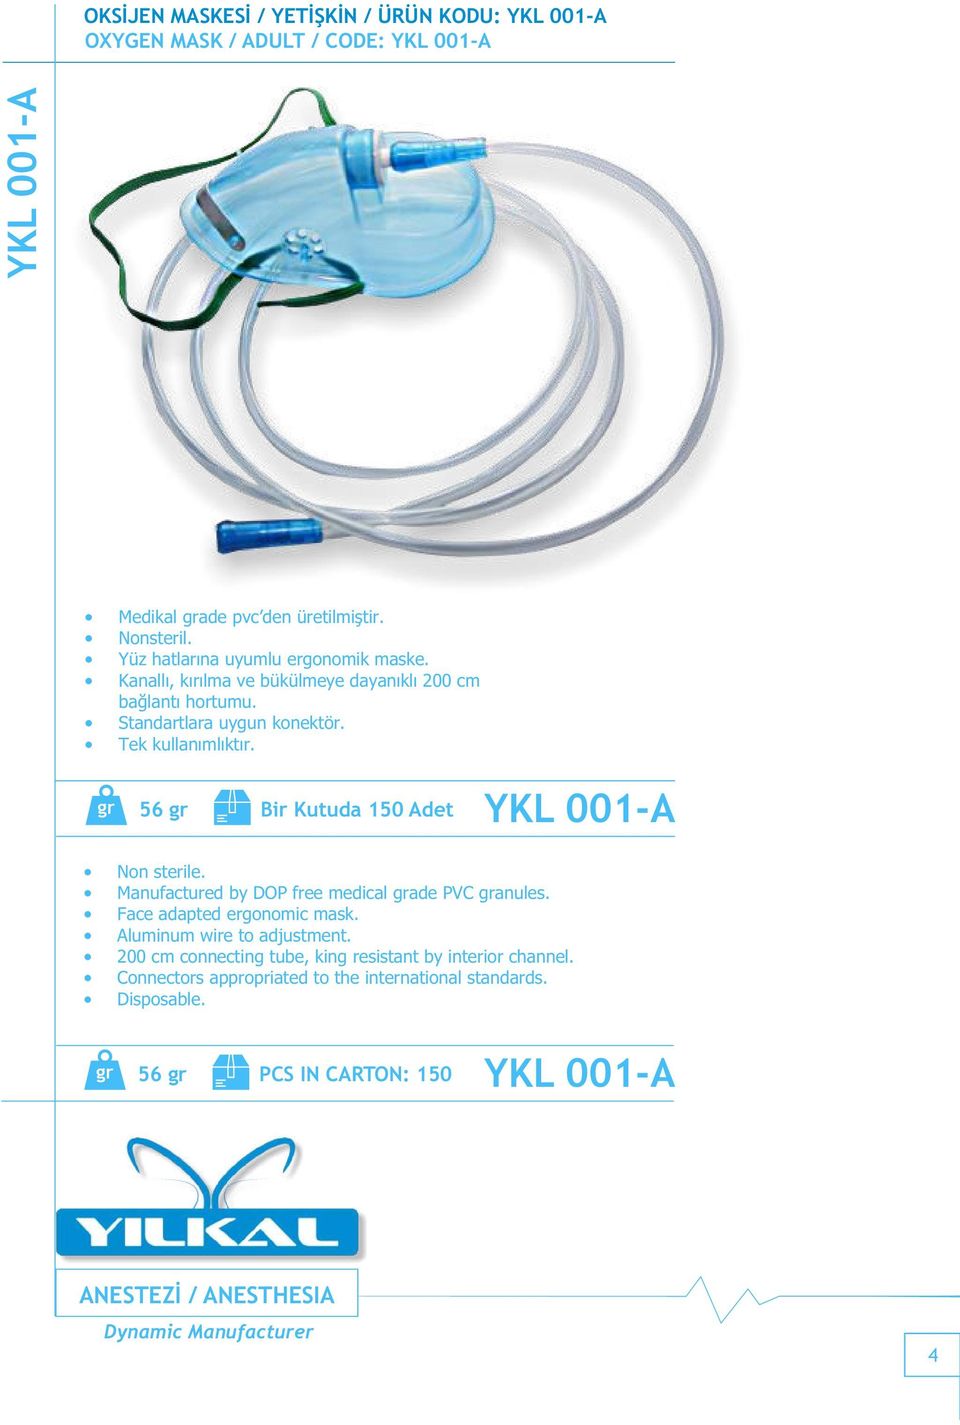 56 gr Bir Kutuda 150 Adet YKL 001-A Non sterile. Manufactured by DOP free medical grade PVC granules. Face adapted ergonomic mask. Aluminum wire to adjustment.